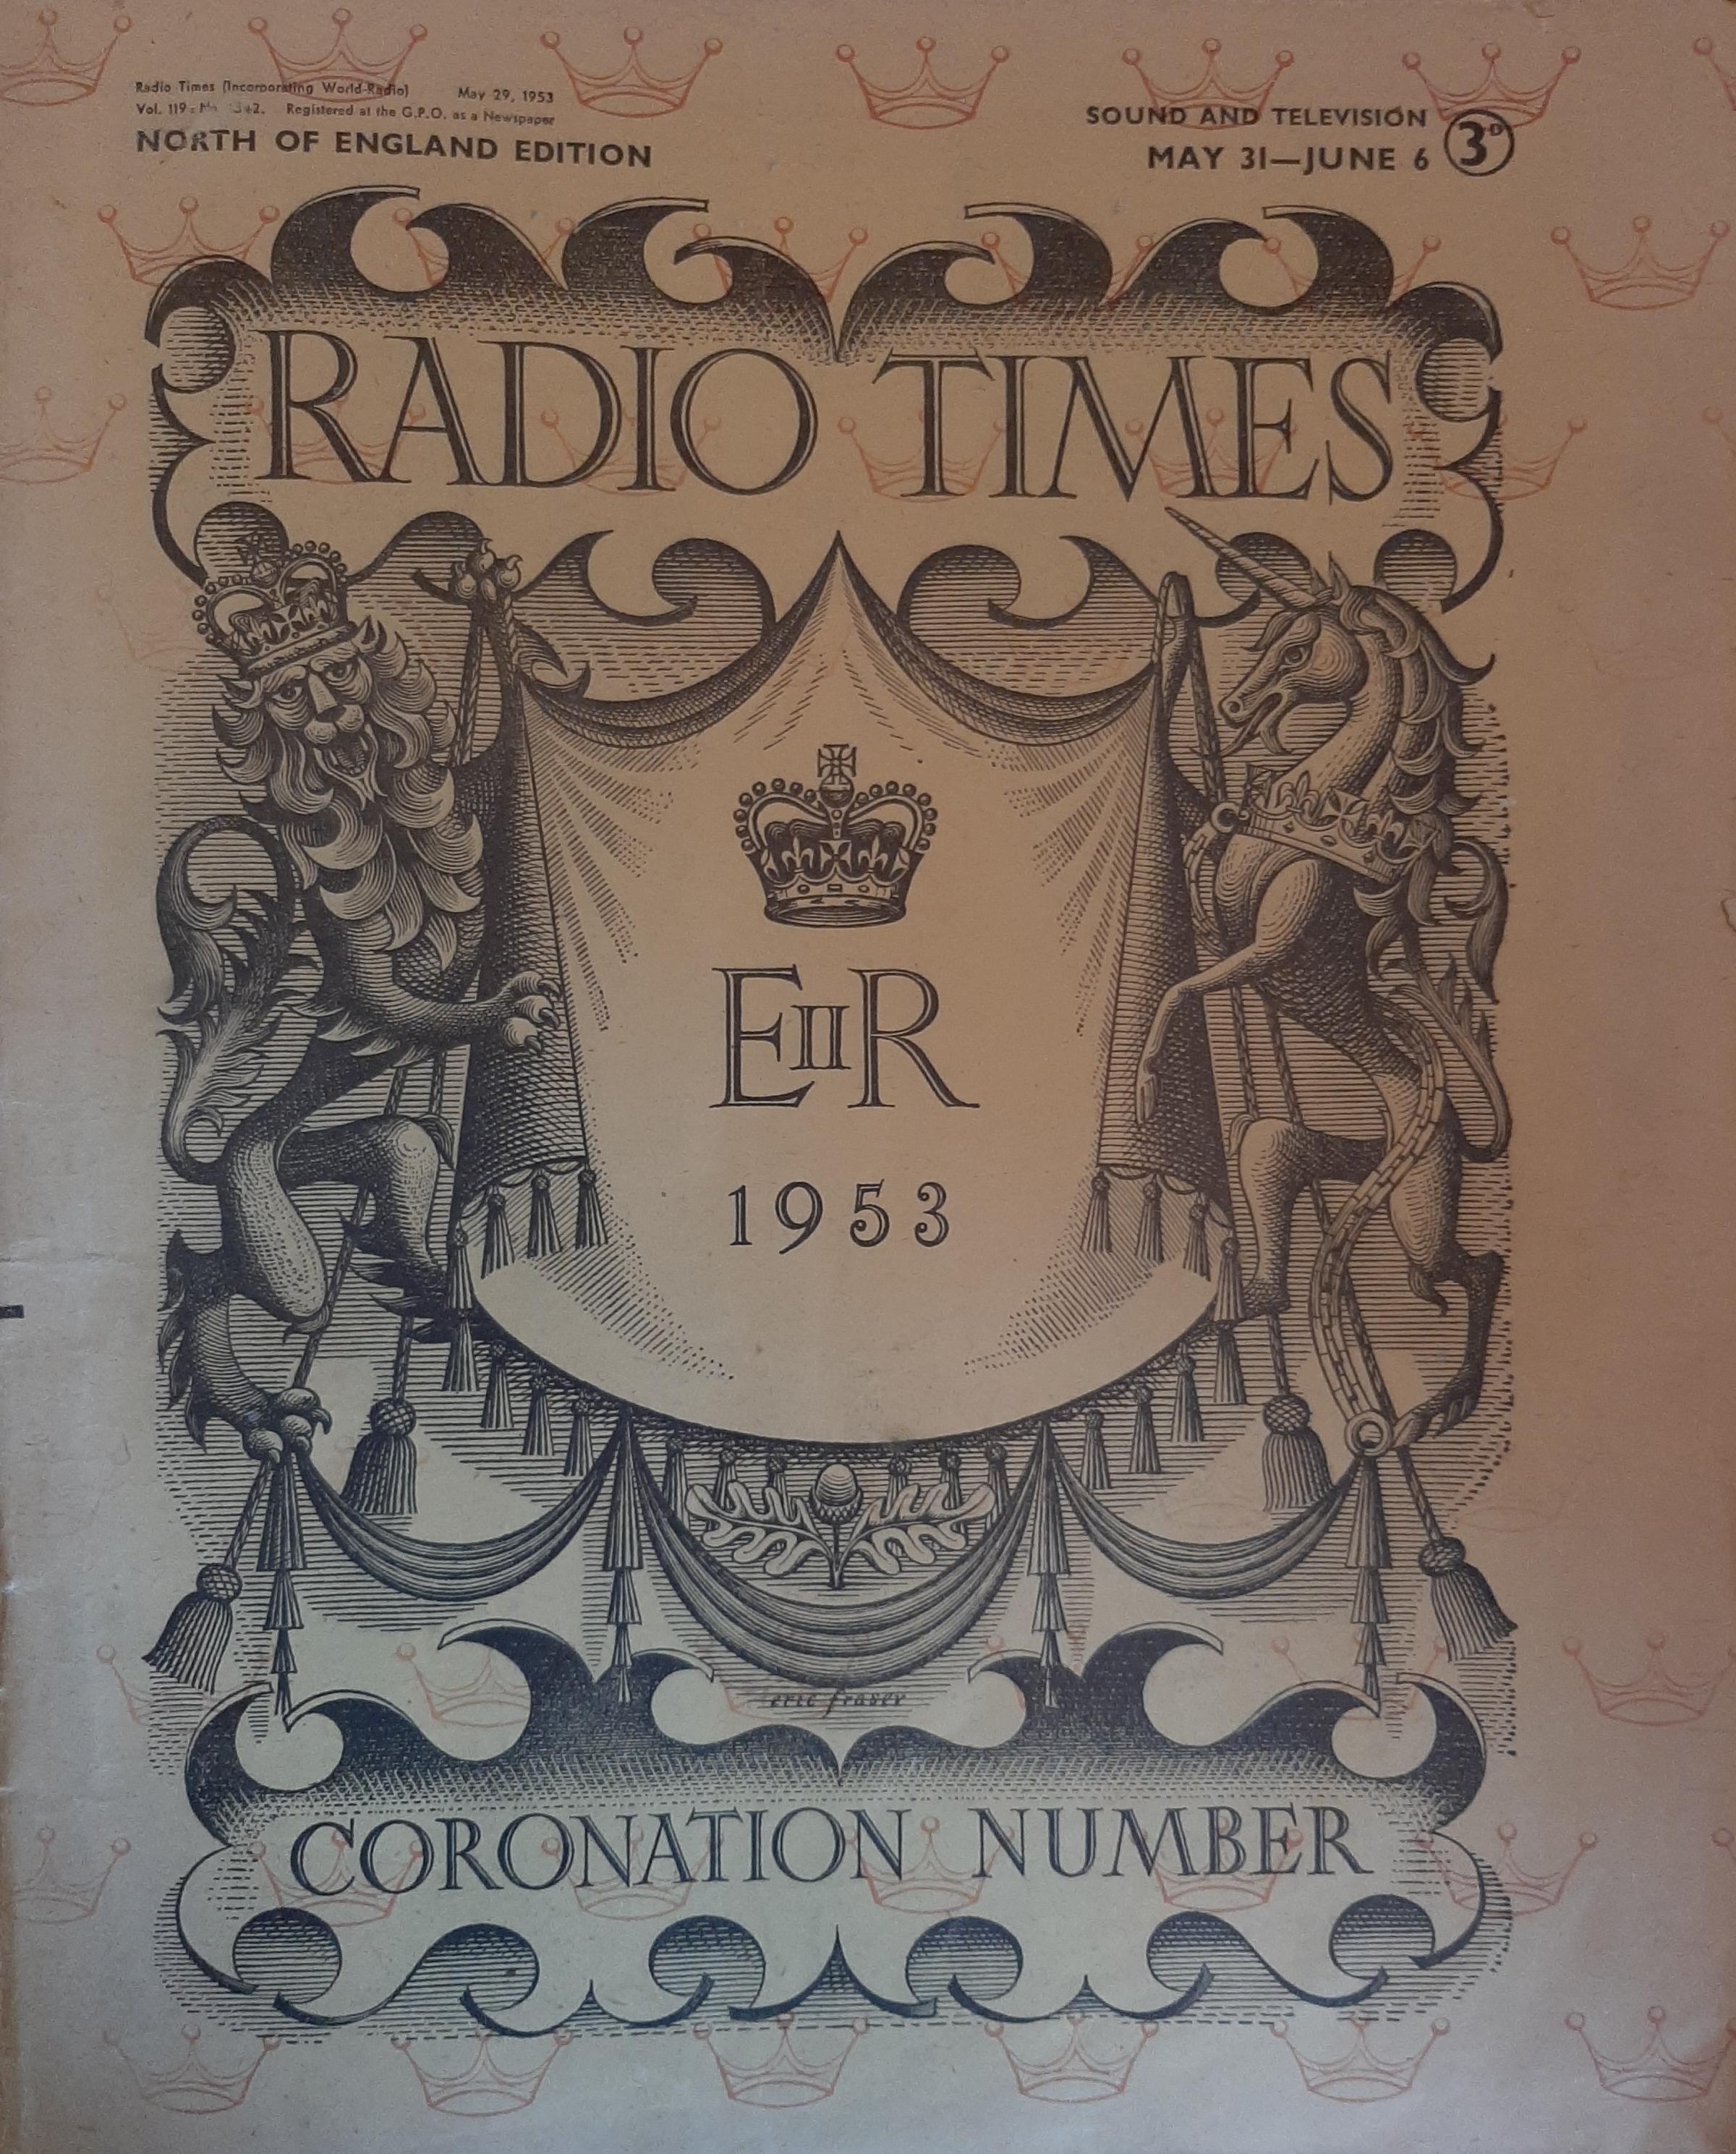 The cover of the special edition Radio Times produced following the coronation